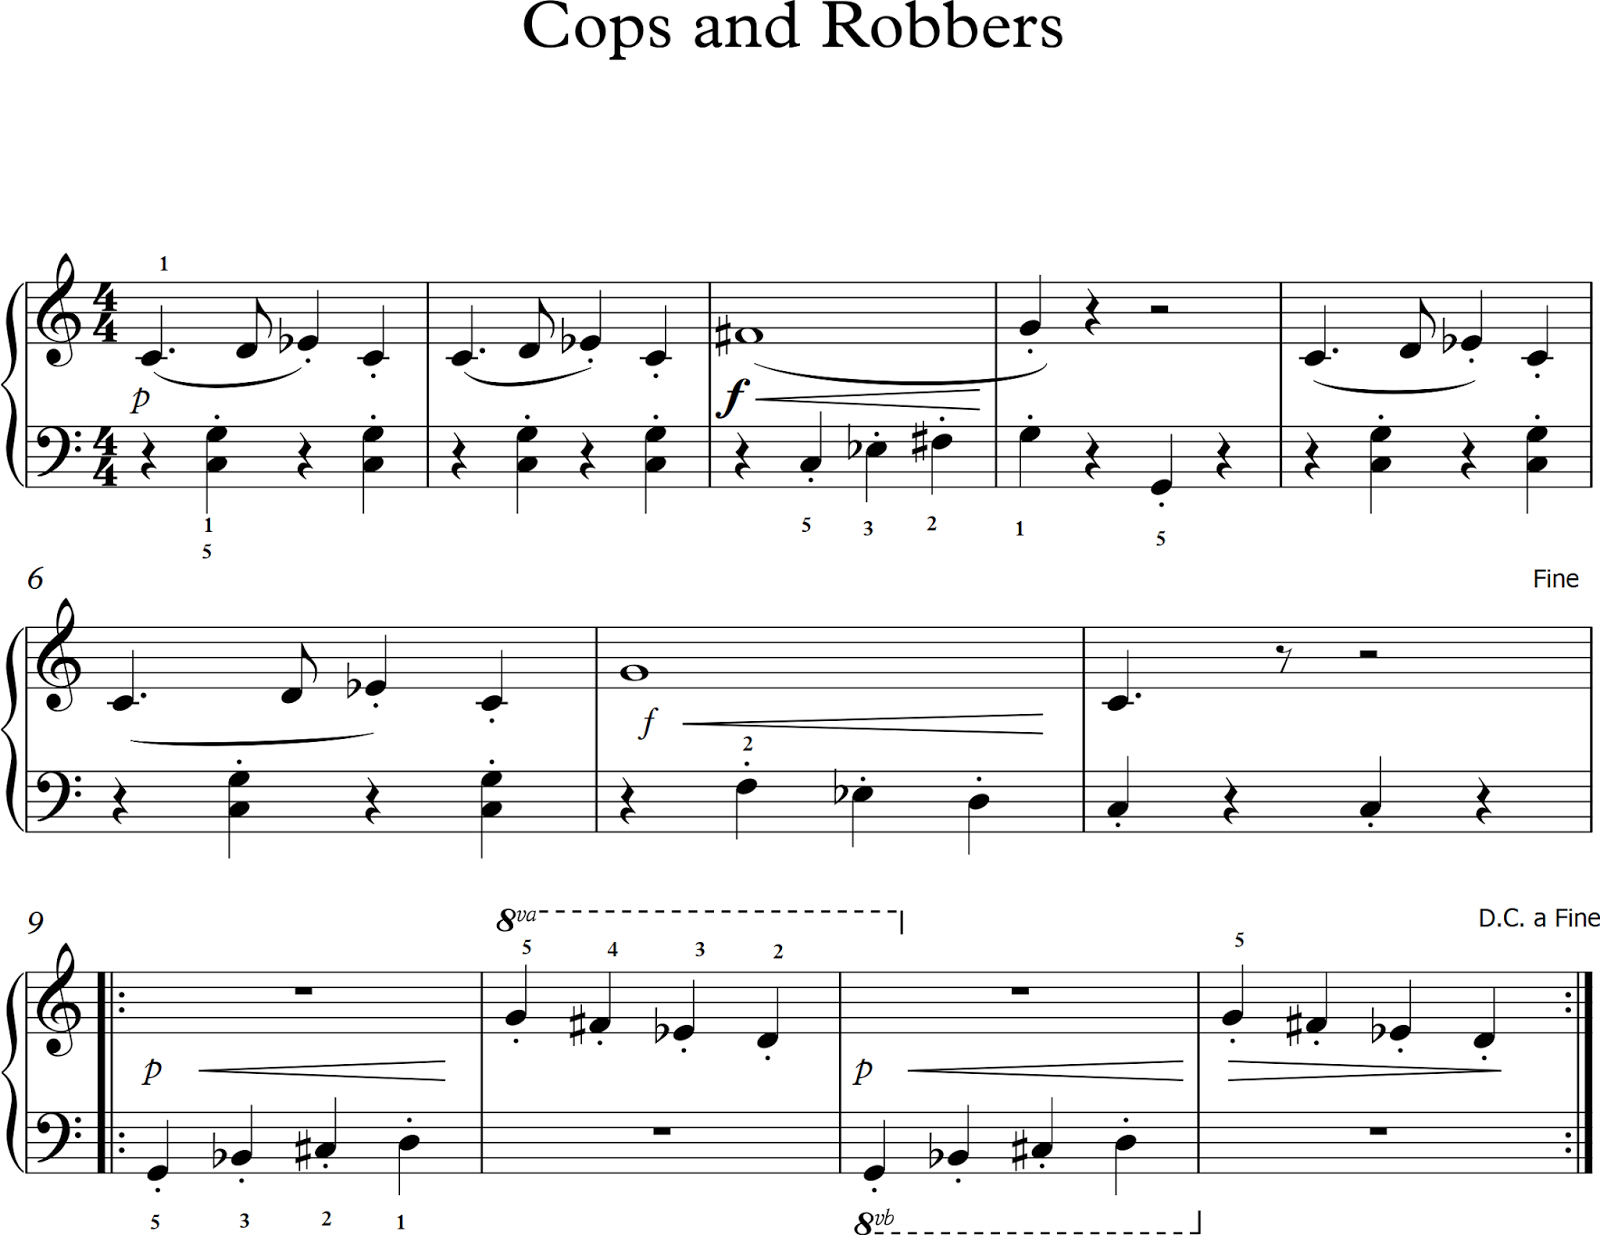 Cops+and+Robbers